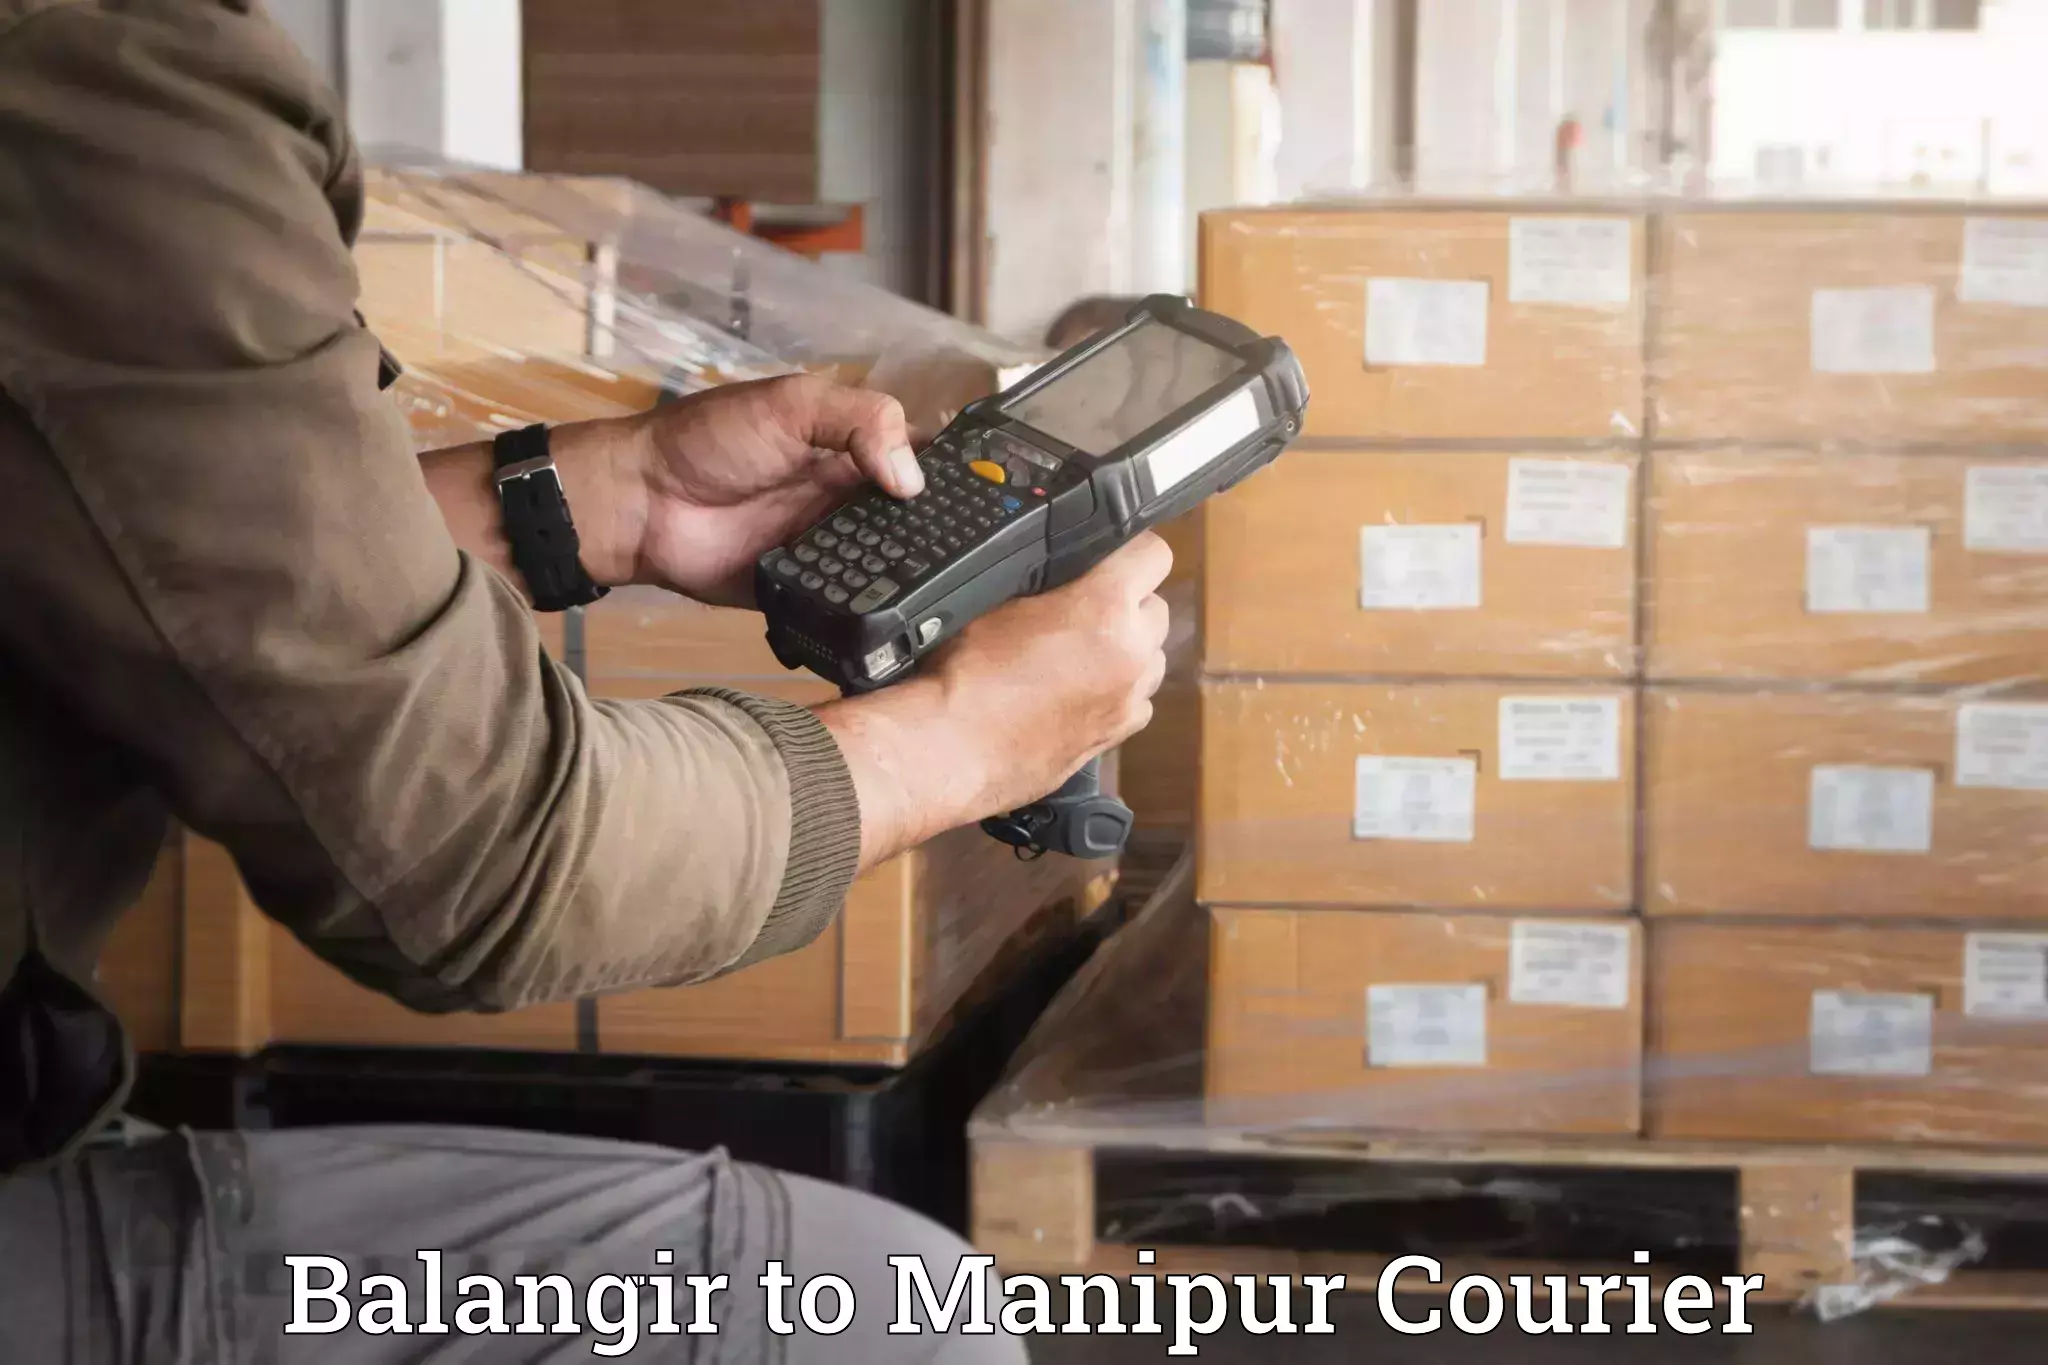 Furniture transport specialists Balangir to Manipur